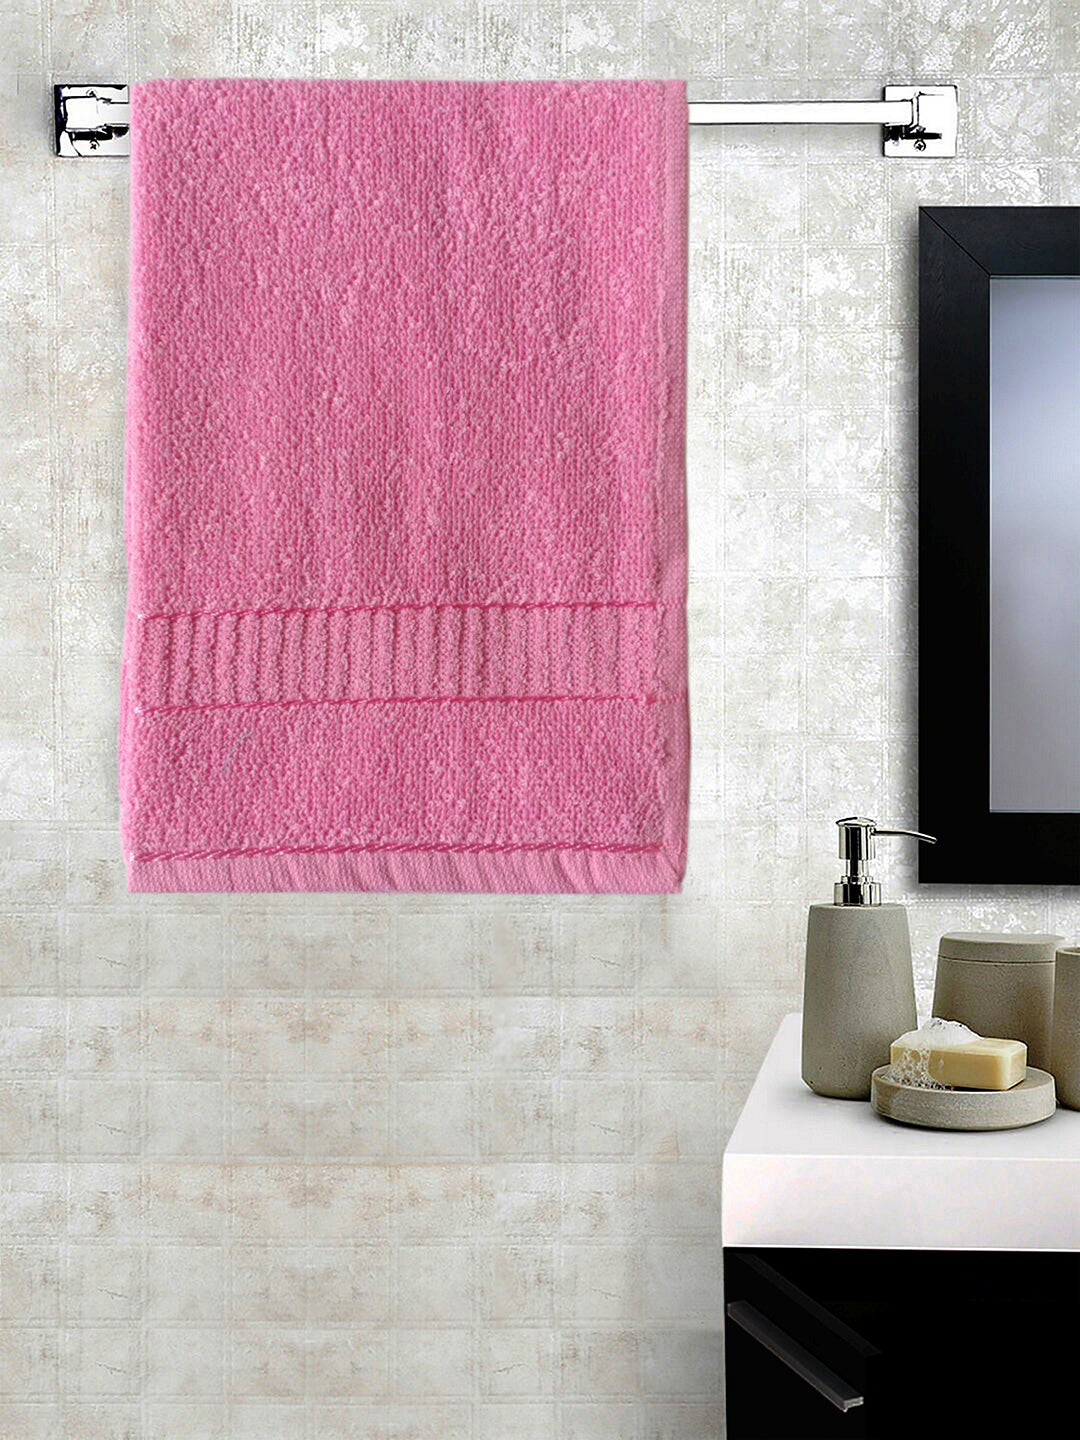 Rose Pink Hand Towel Set of 6 Solid Popcorn Weave Plain Cotton Crepe Design with track Border, Soft Small Basic Size 35x50 cms, Premium 400 GSM Absorbant Towels by Lushomes